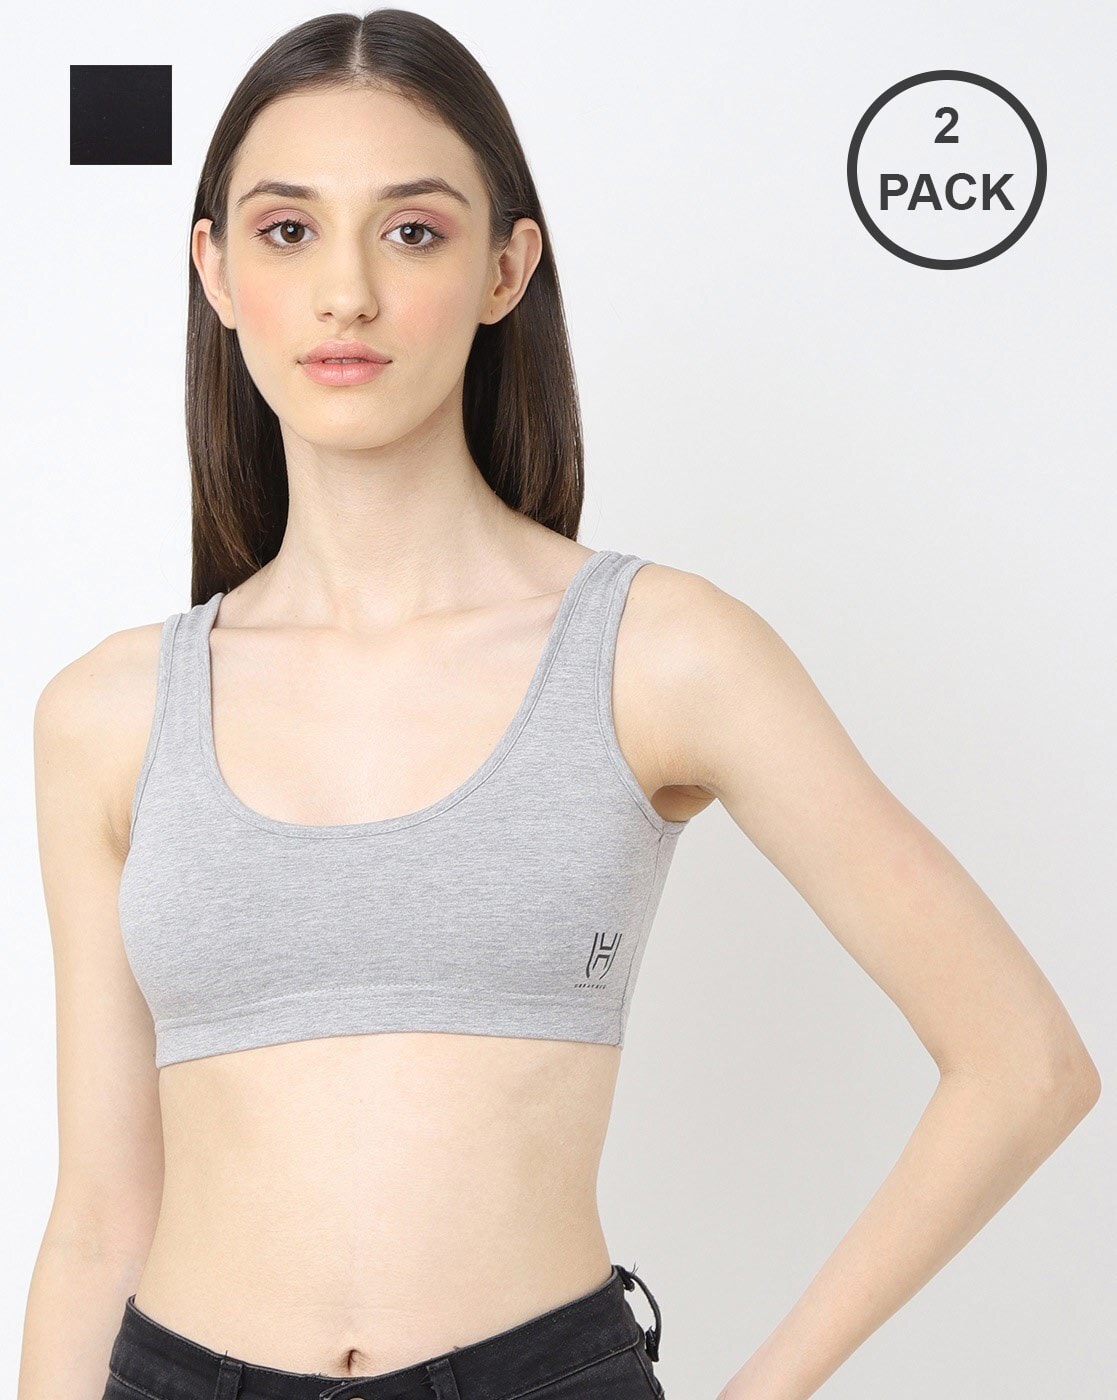 Buy Urban Hug Pack of 2 Compression Sports Bras at Redfynd